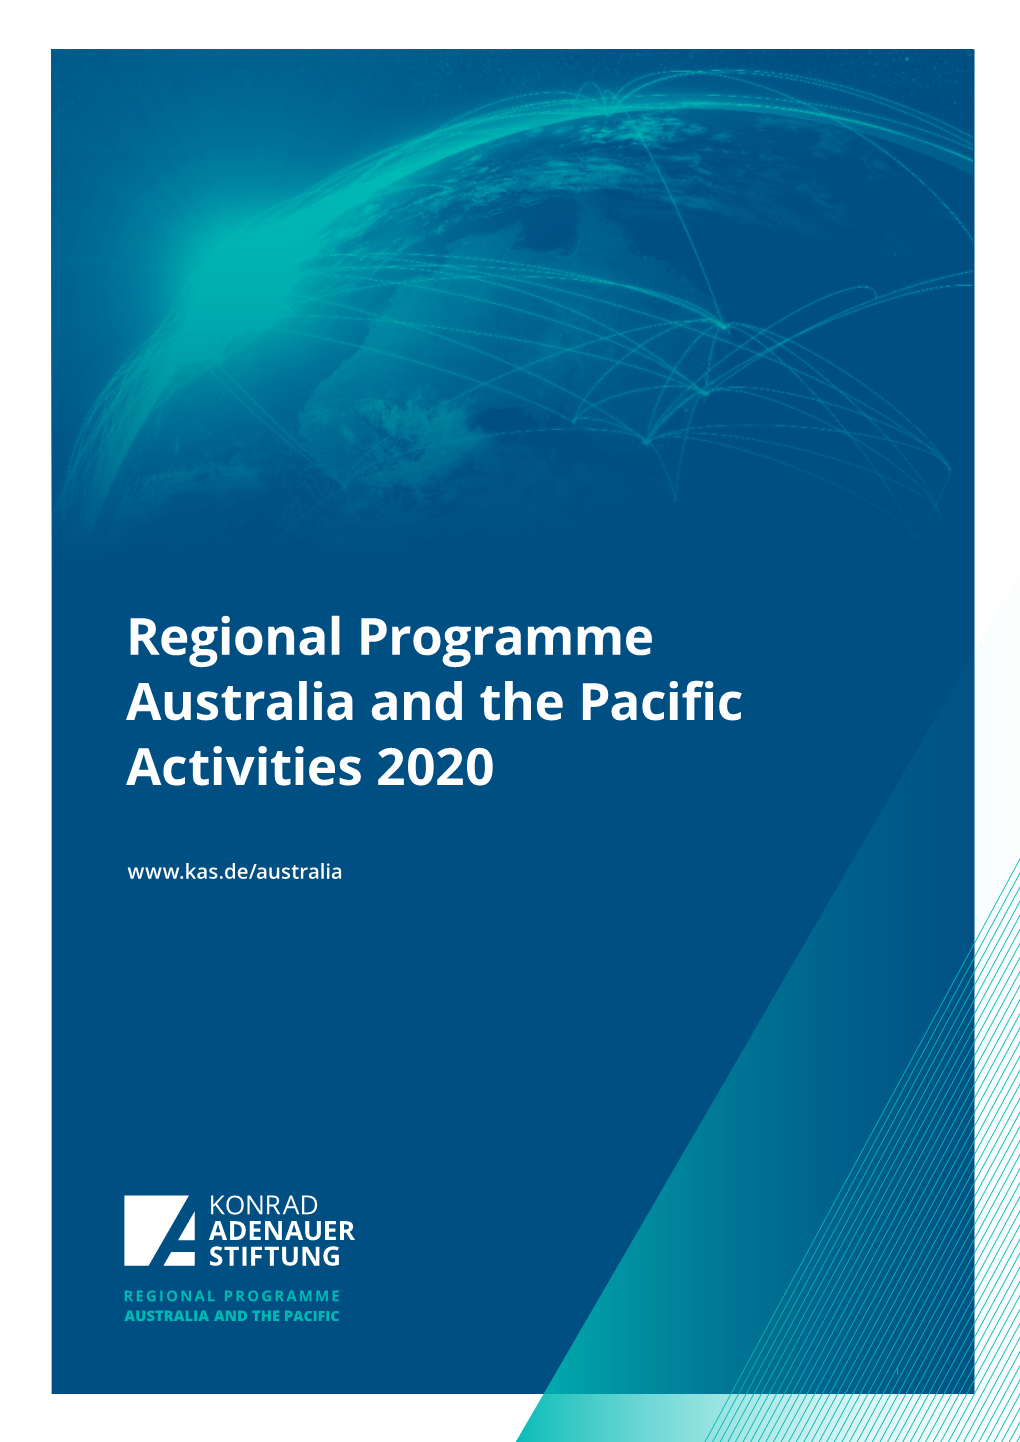 Regional Programme Australia and the Pacific Activities 2020